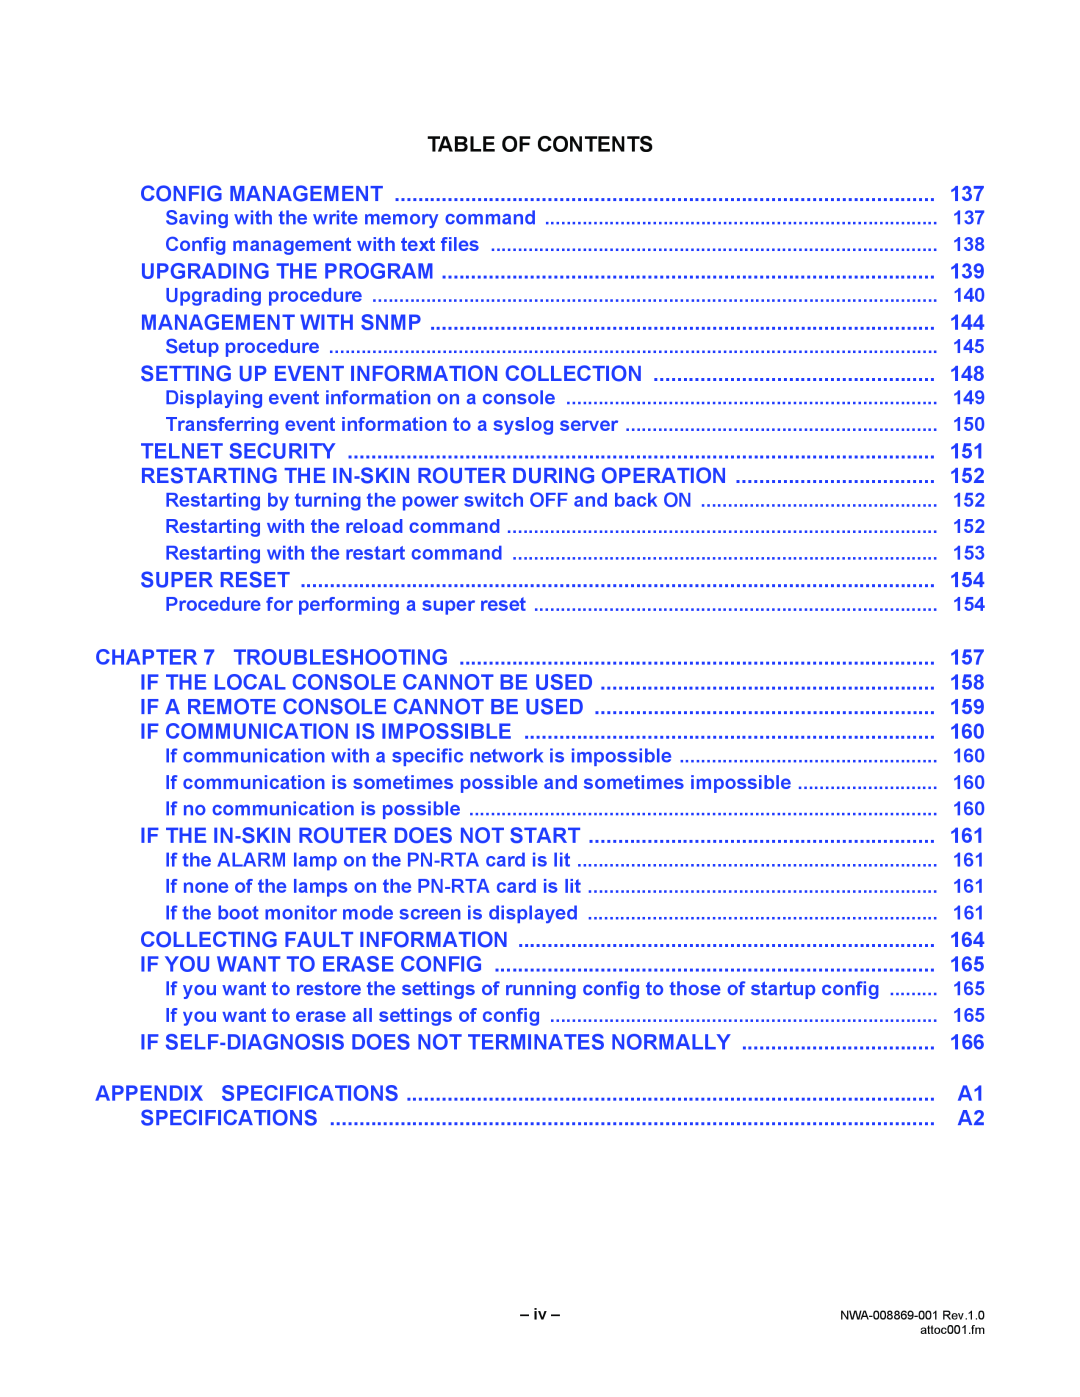 NEC NWA-008869-001 manual Table Of Contents 